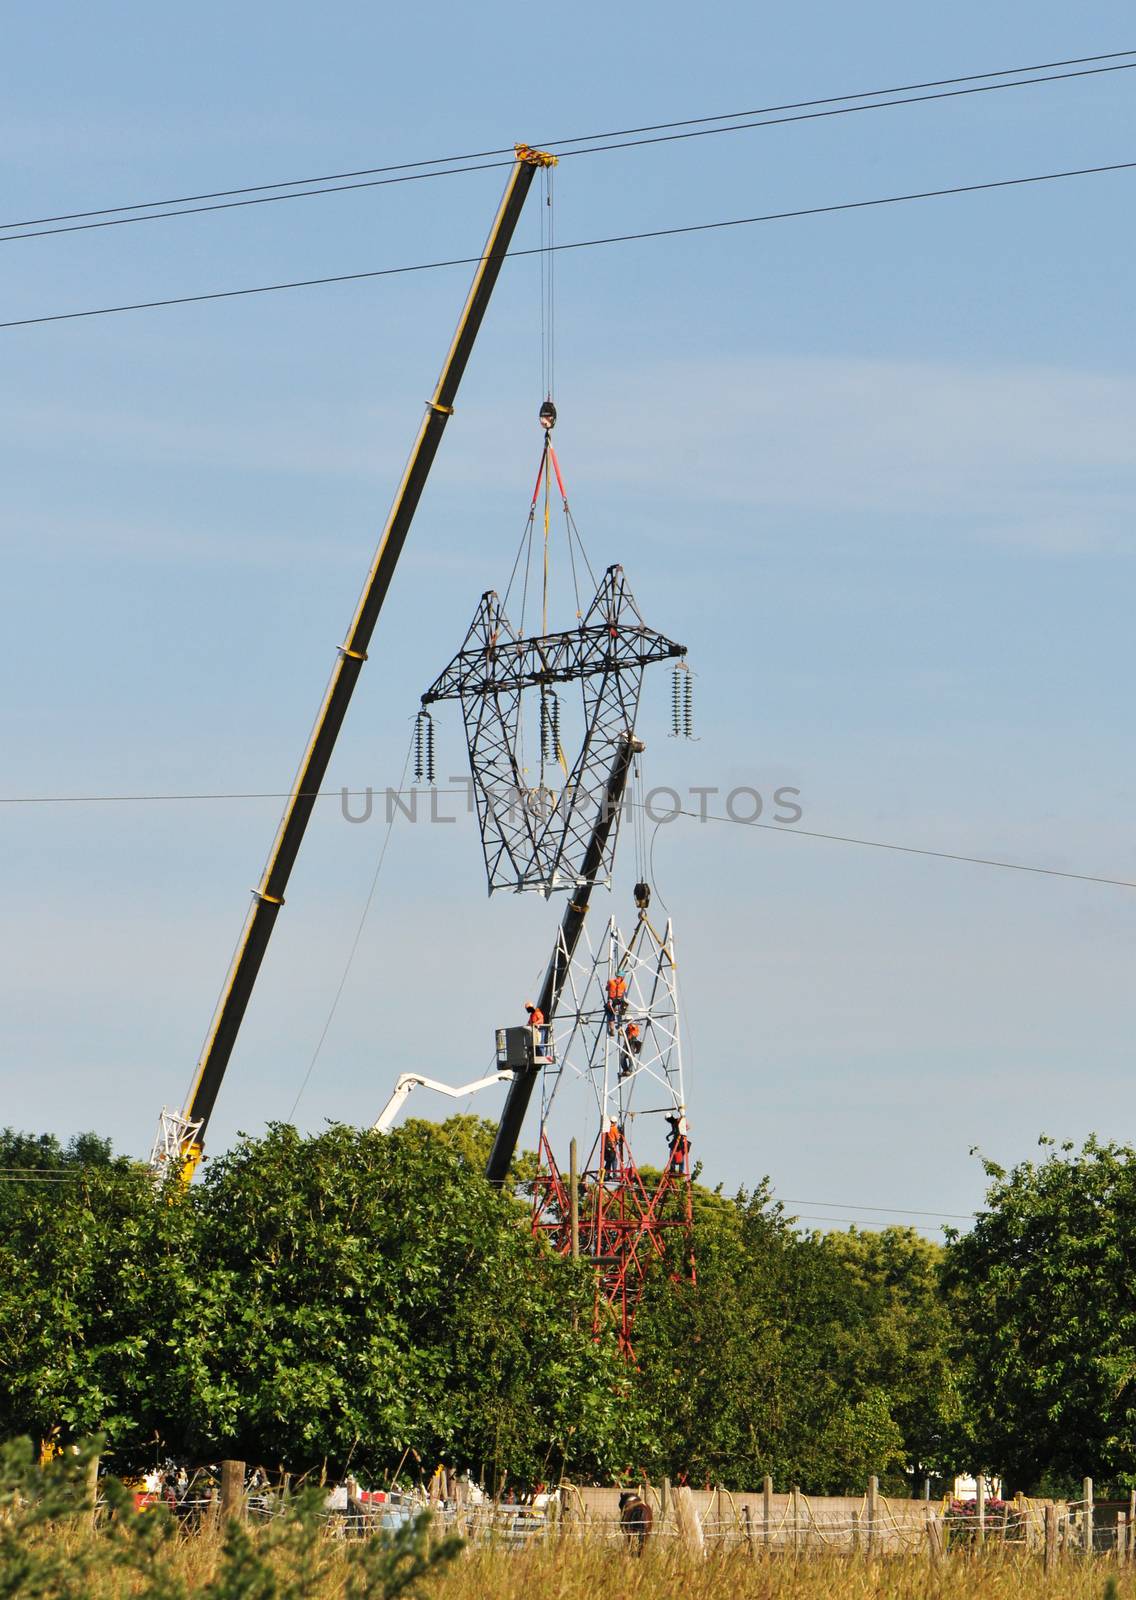 Top Changing of an Electrical Pylon by shkyo30